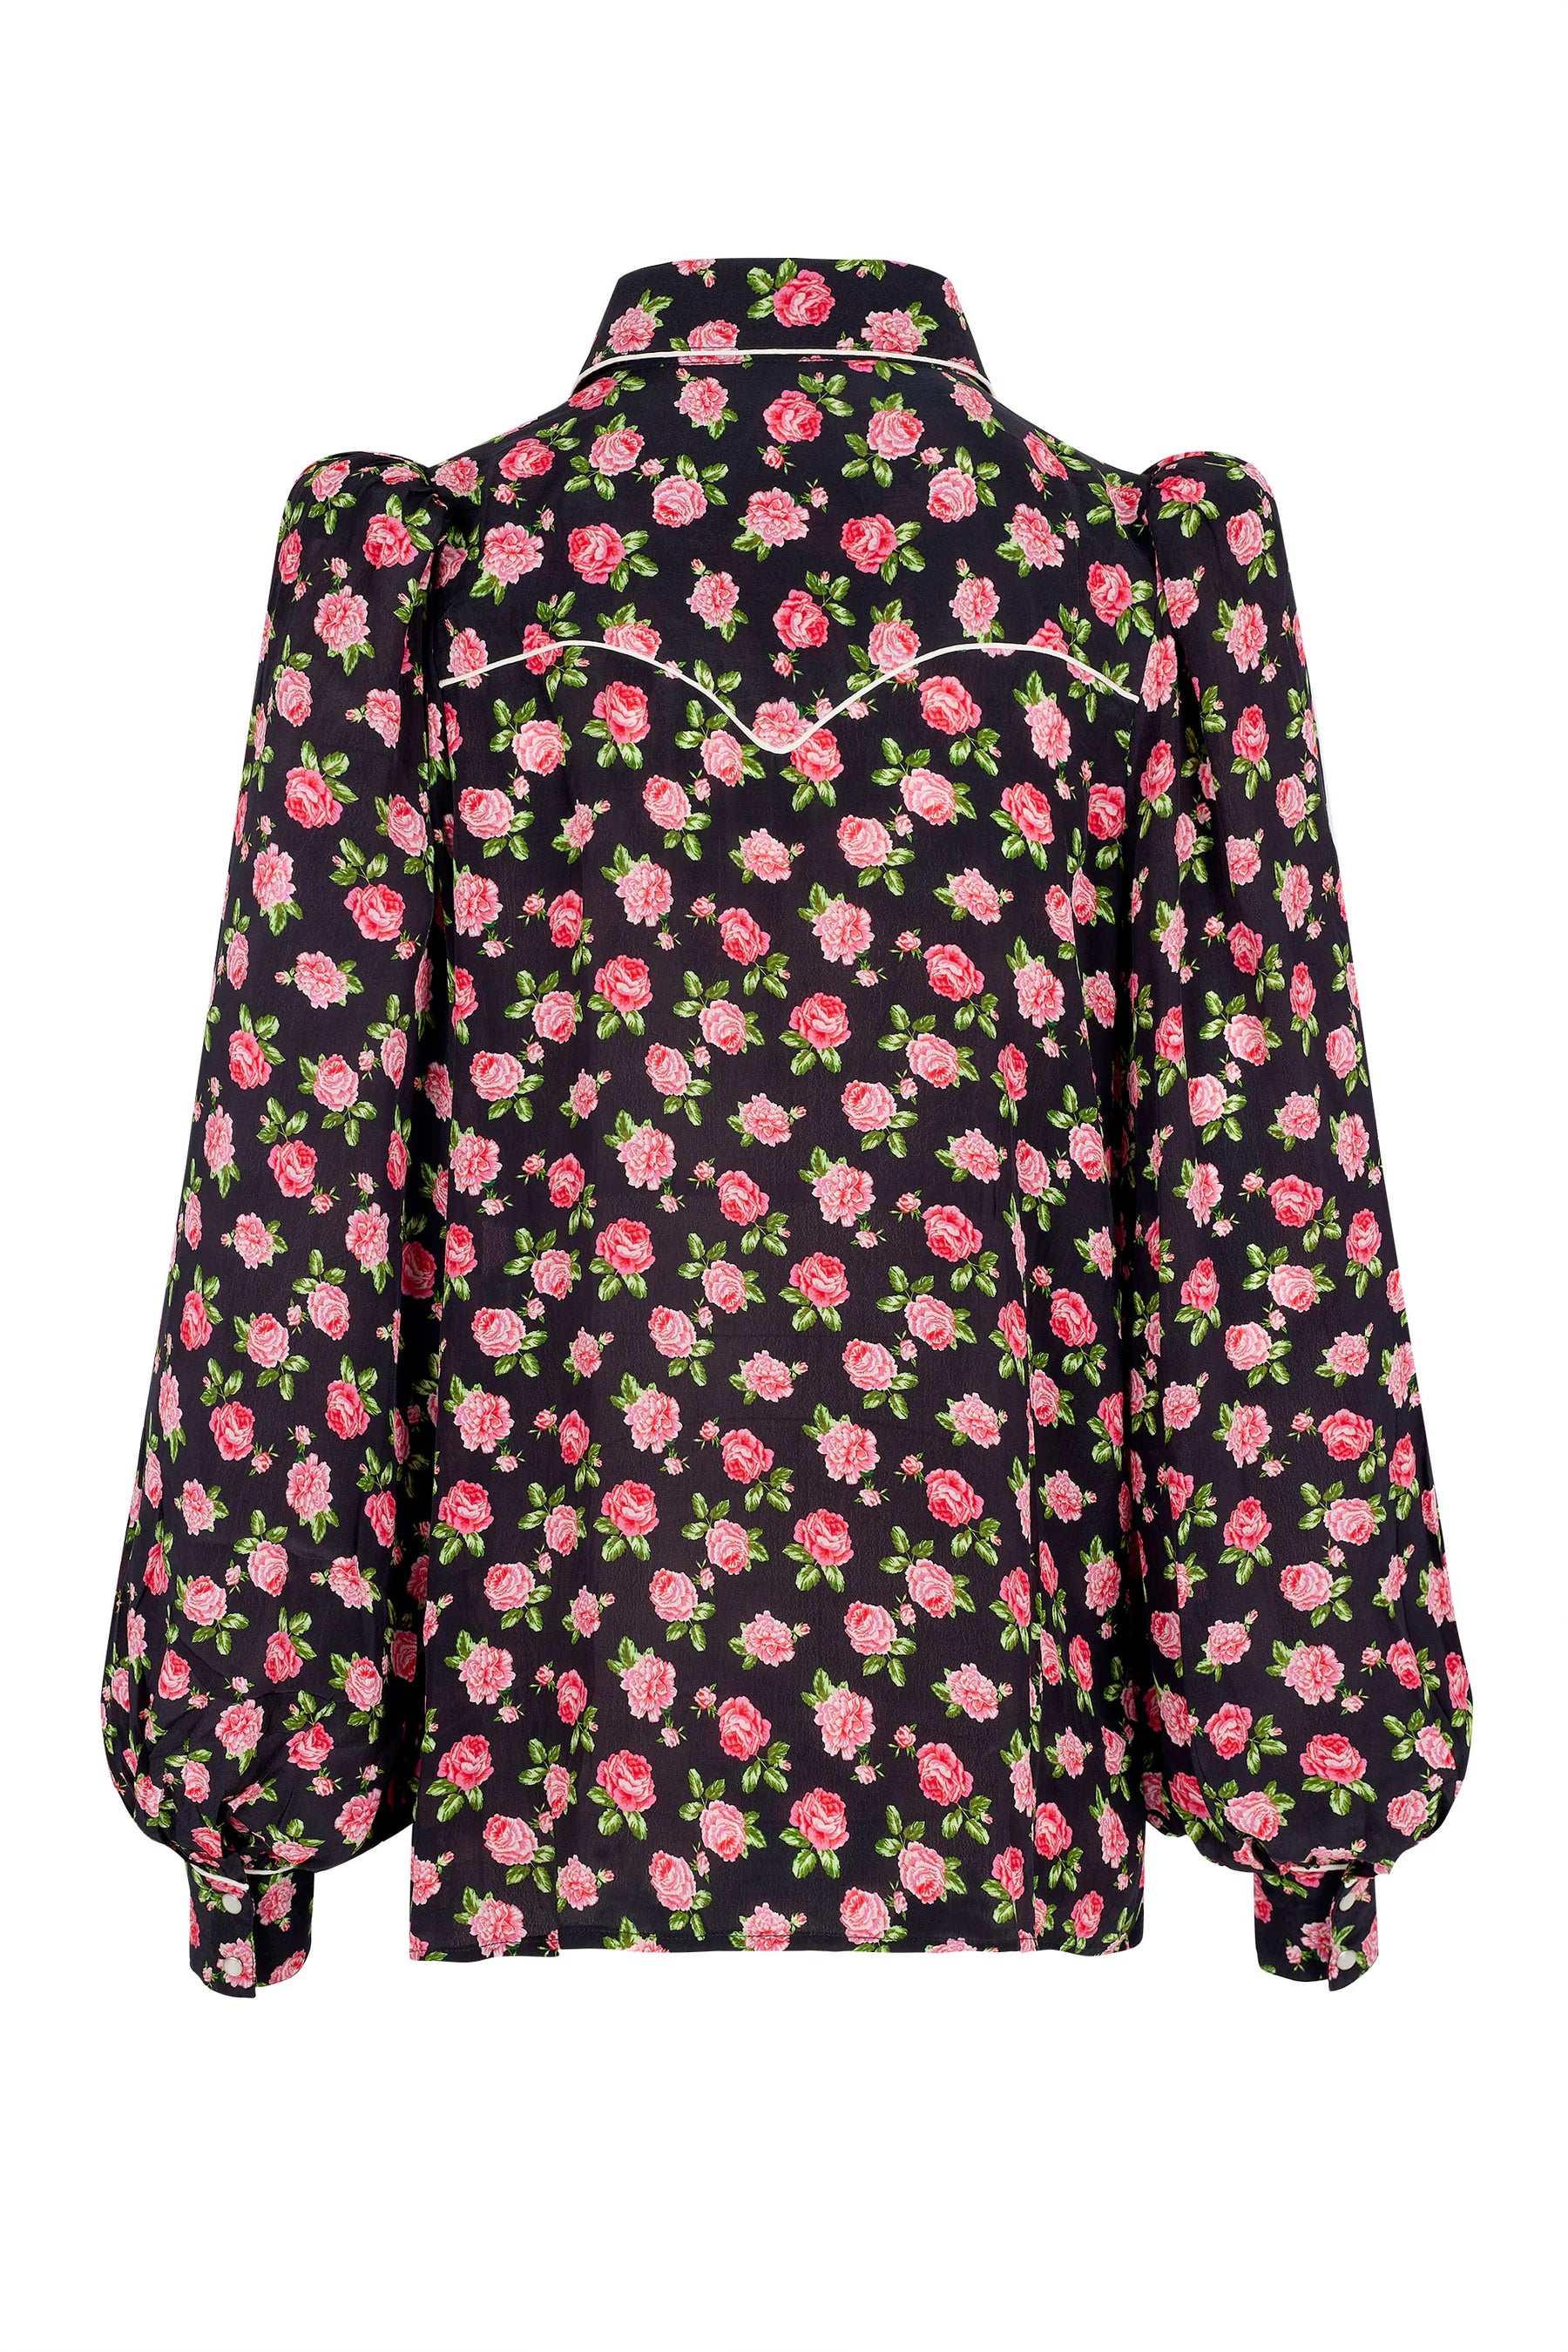 QUEENS OF ARCHIVE EVIE BLOUSE 124